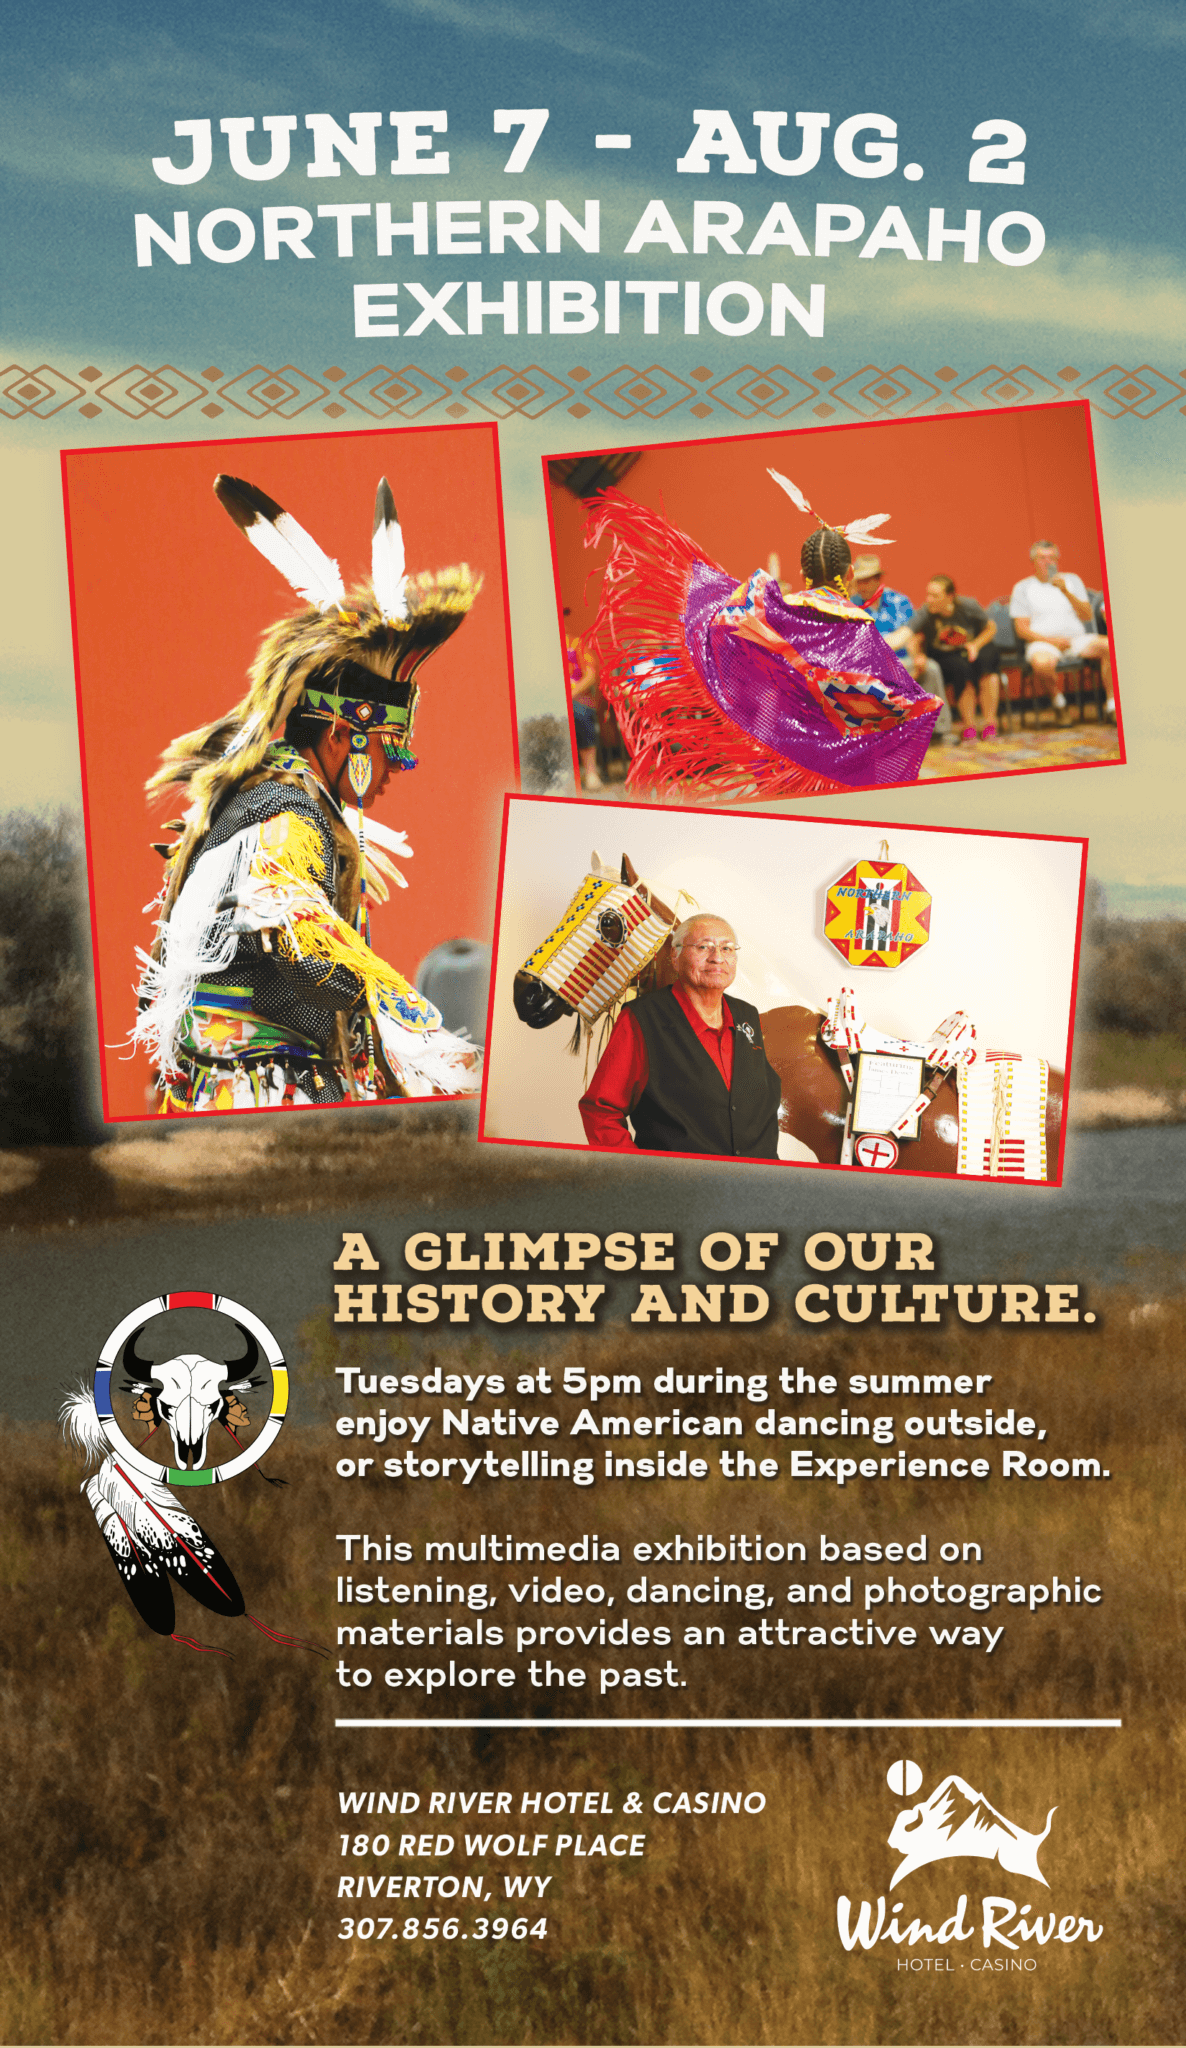 Promotional flyer for Northern Arapaho Exhibition showcasing Native American history and culture with images of traditional dancing and artifacts at Wind River Hotel & Casino.